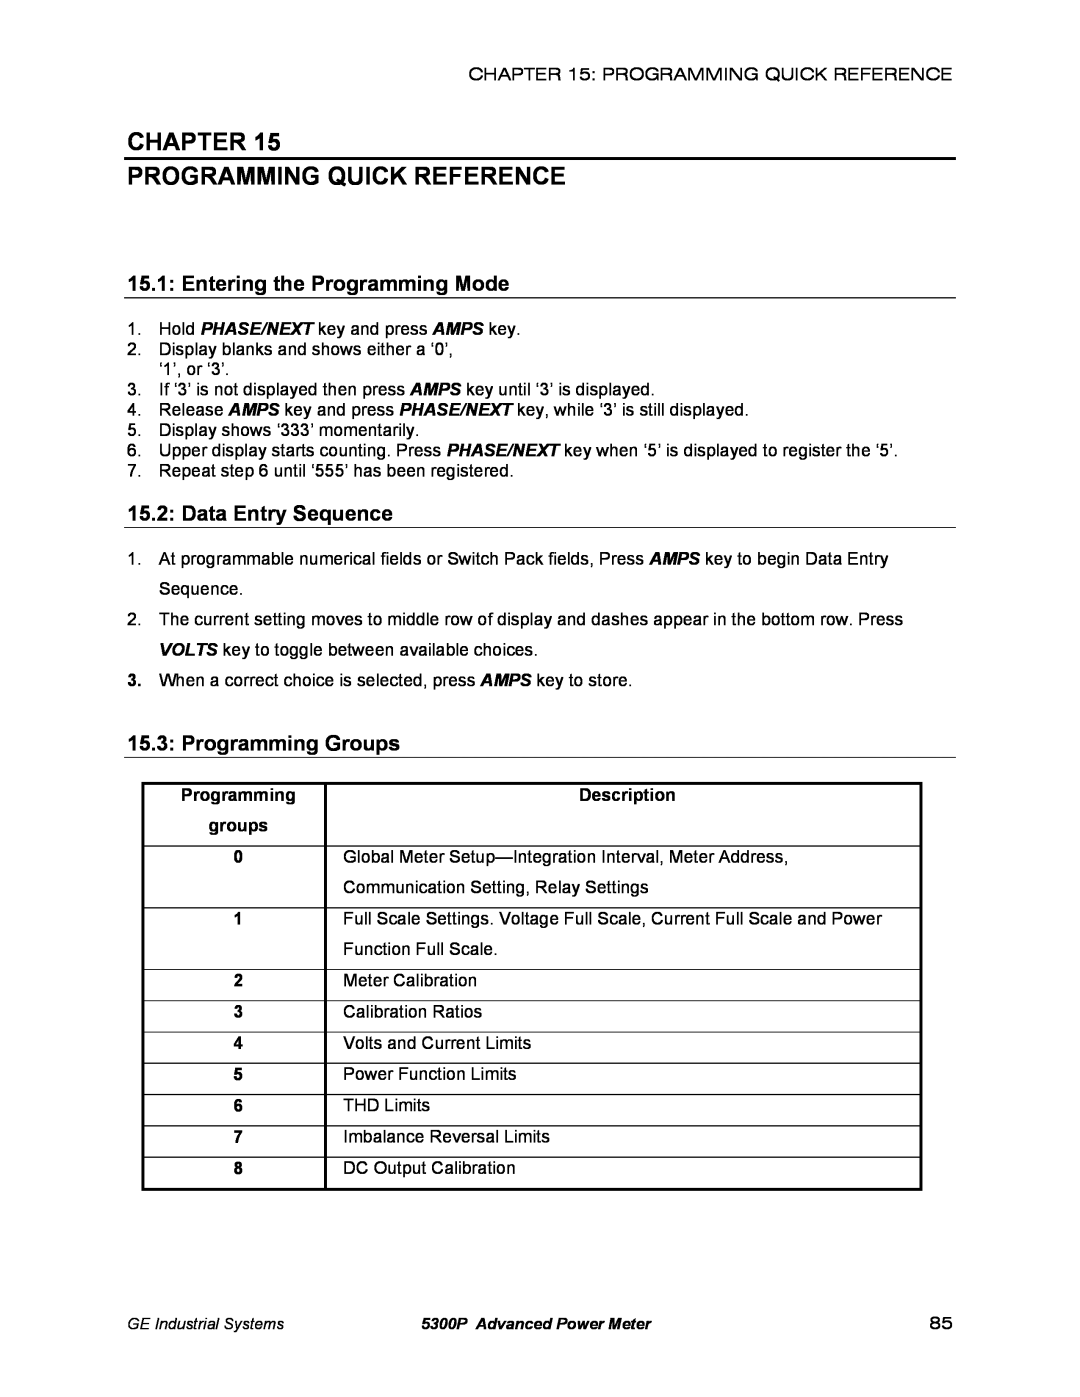 GE EPM 5350 Chapter Programming Quick Reference, Entering the Programming Mode, Data Entry Sequence, Programming Groups 